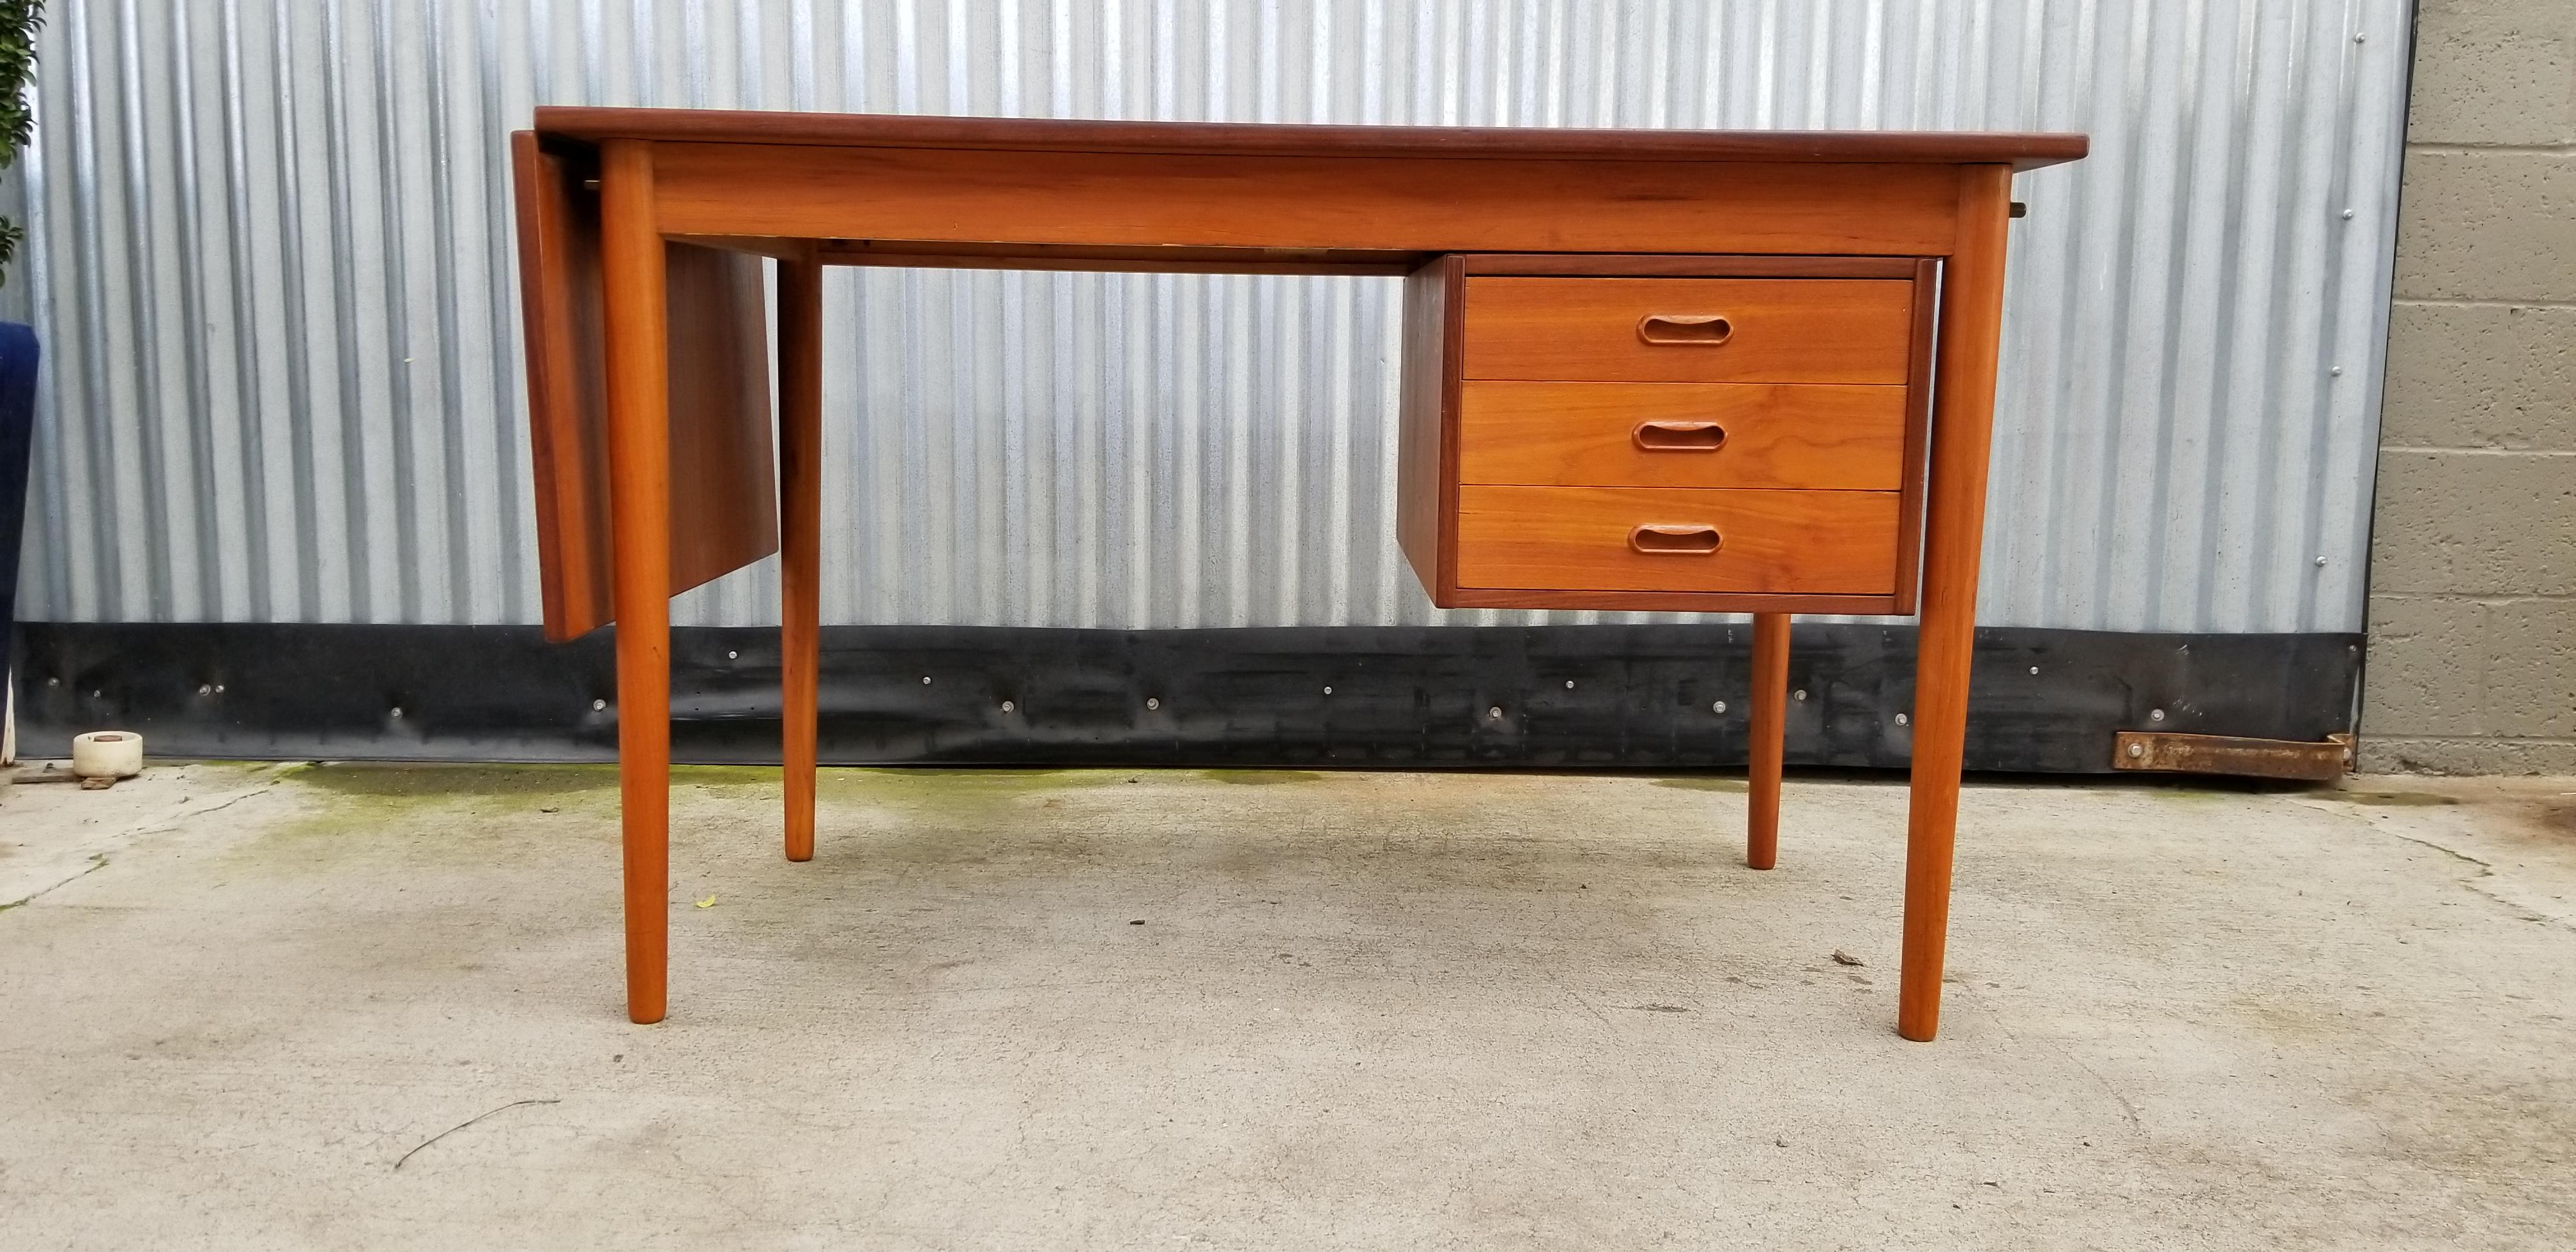 A Danish modern teak desk designed by Arne Vodder, circa 1960s. Featuring a sliding drawer unit that allows use as a right or left handed desk. Sliding top surface with a drop-leaf extension adds versatility to work surface. Classic Danish